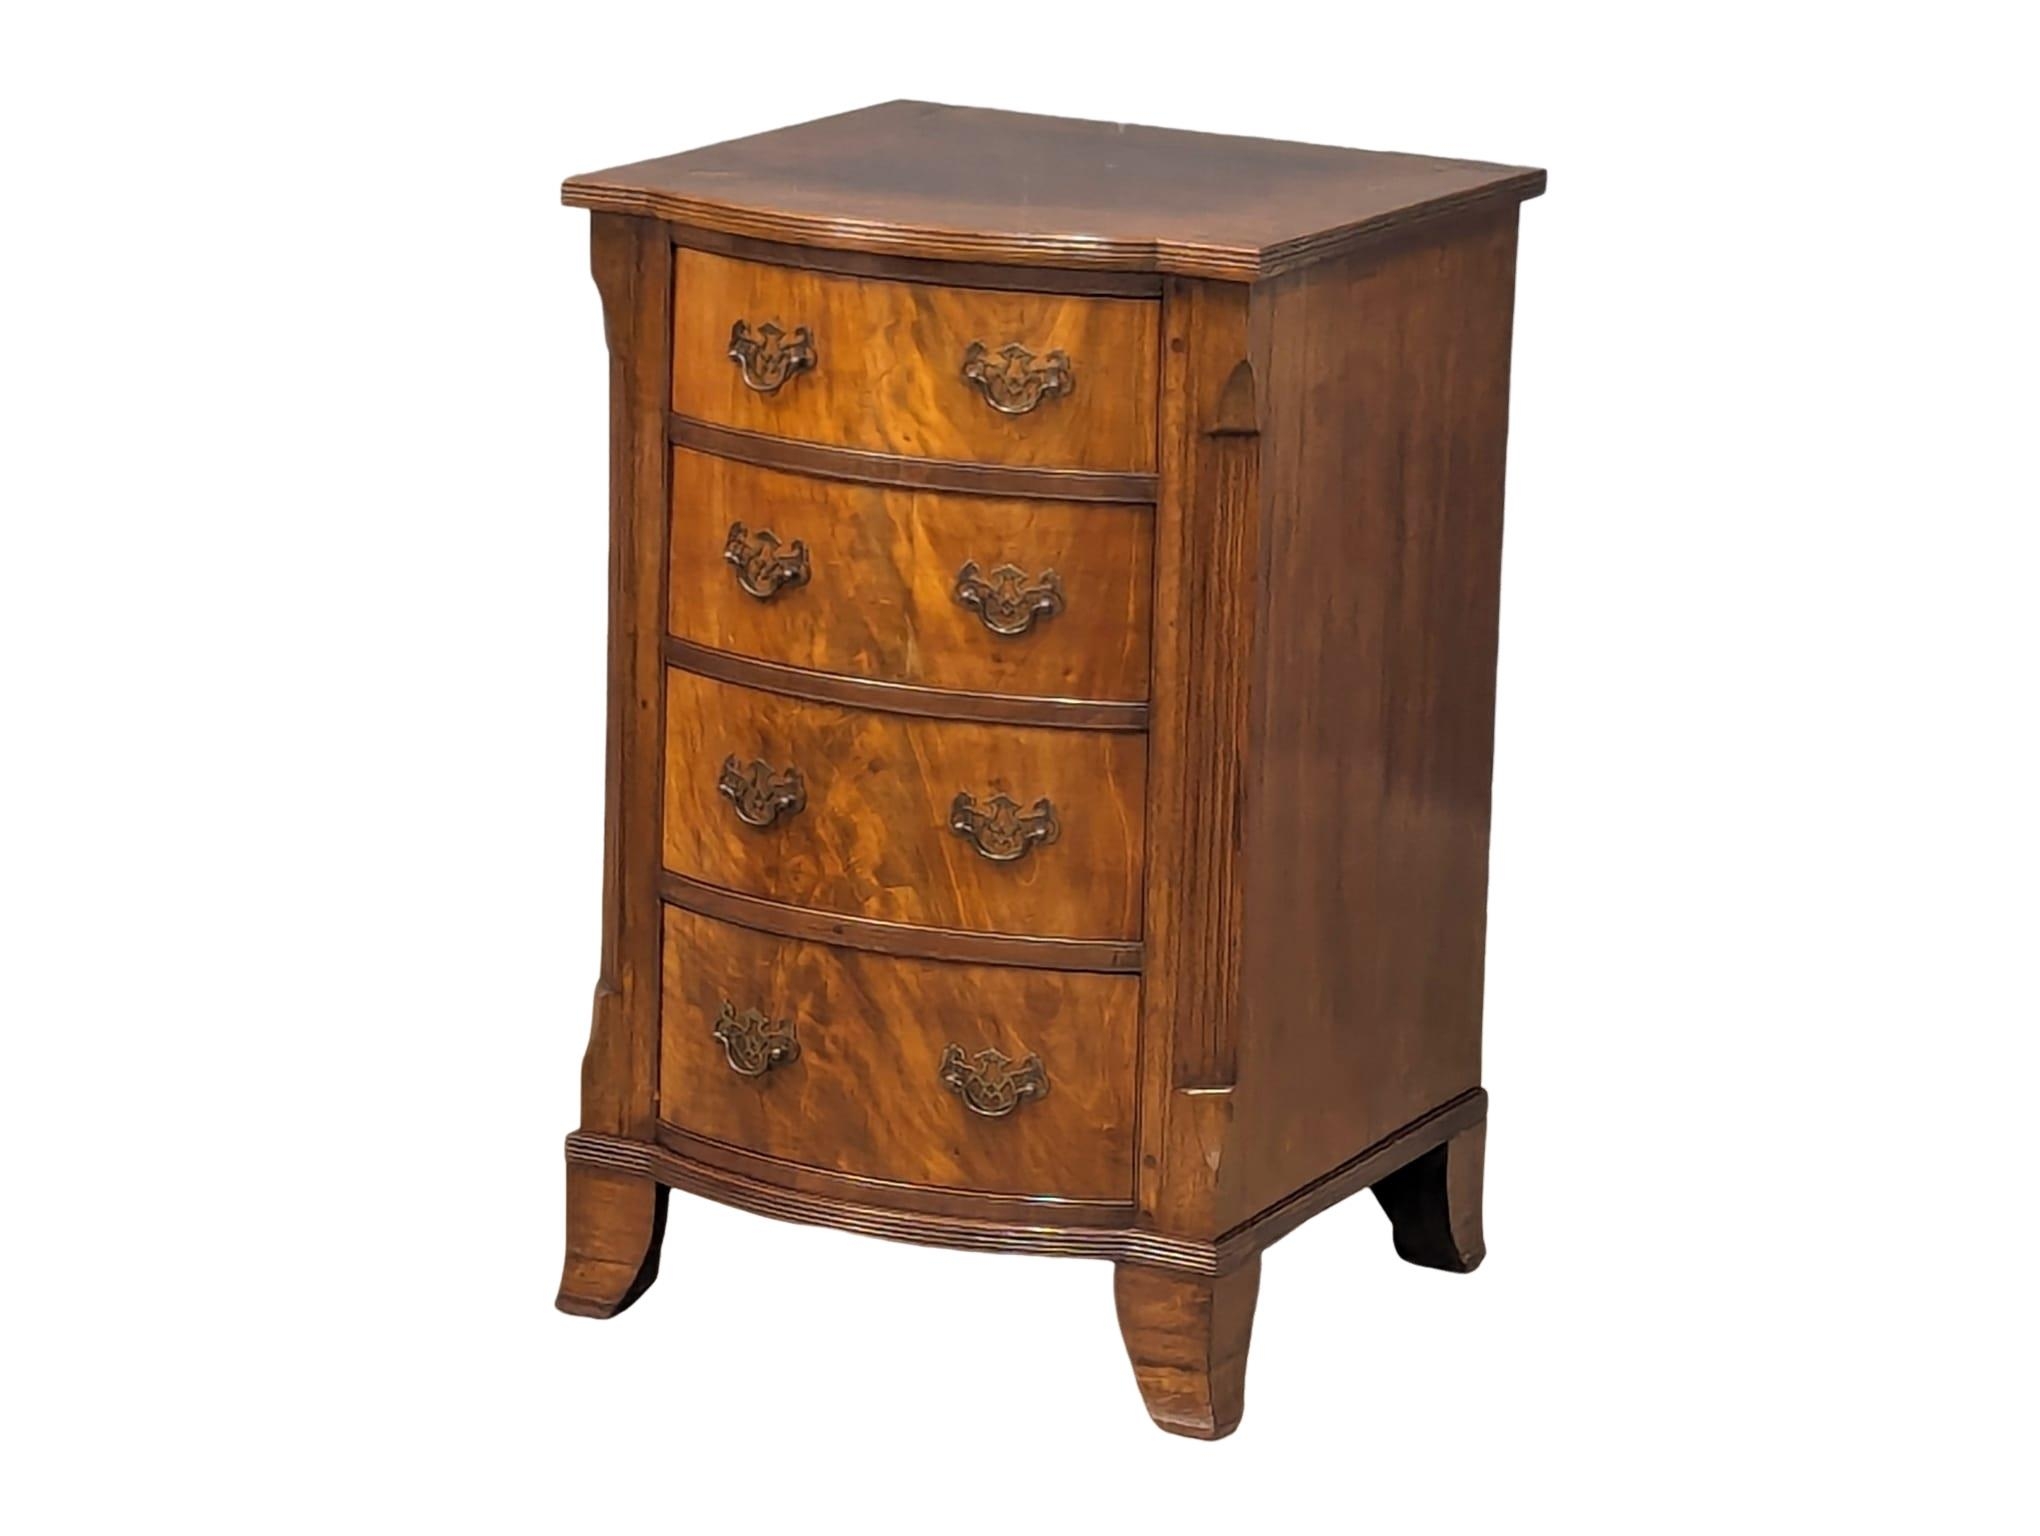 A vintage Georgian style mahogany Serpentine front chest of drawers. 50x51x78cm